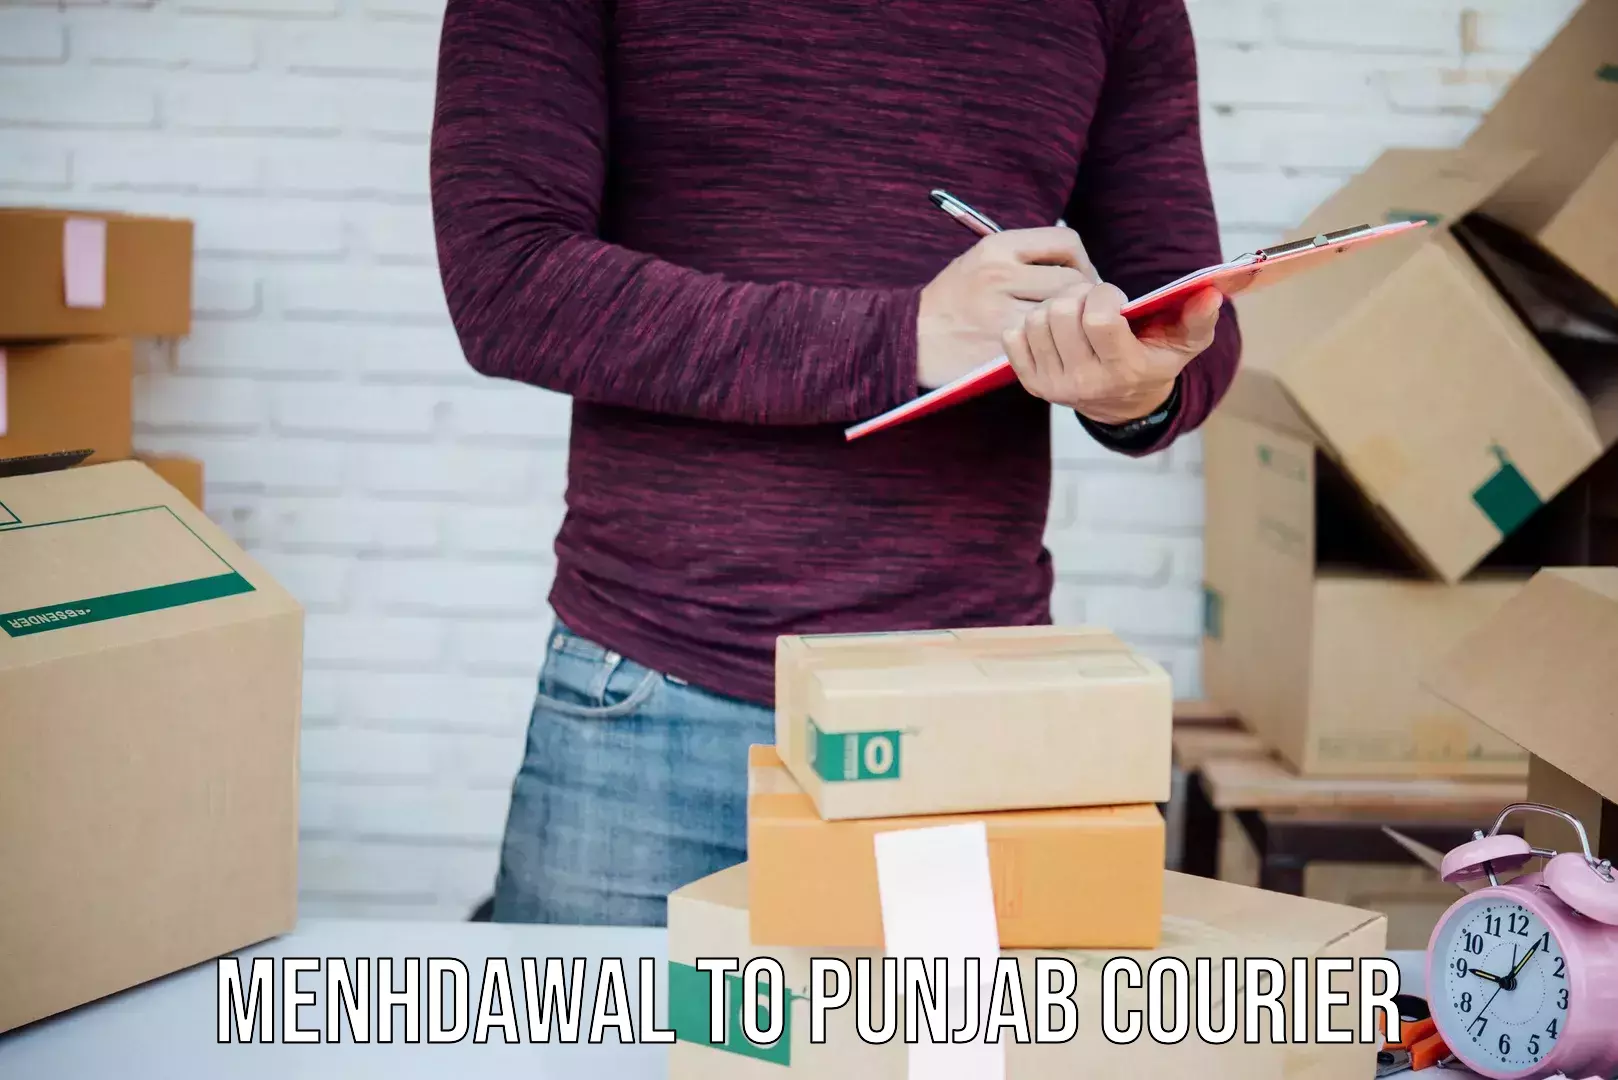 Premium delivery services Menhdawal to Punjab